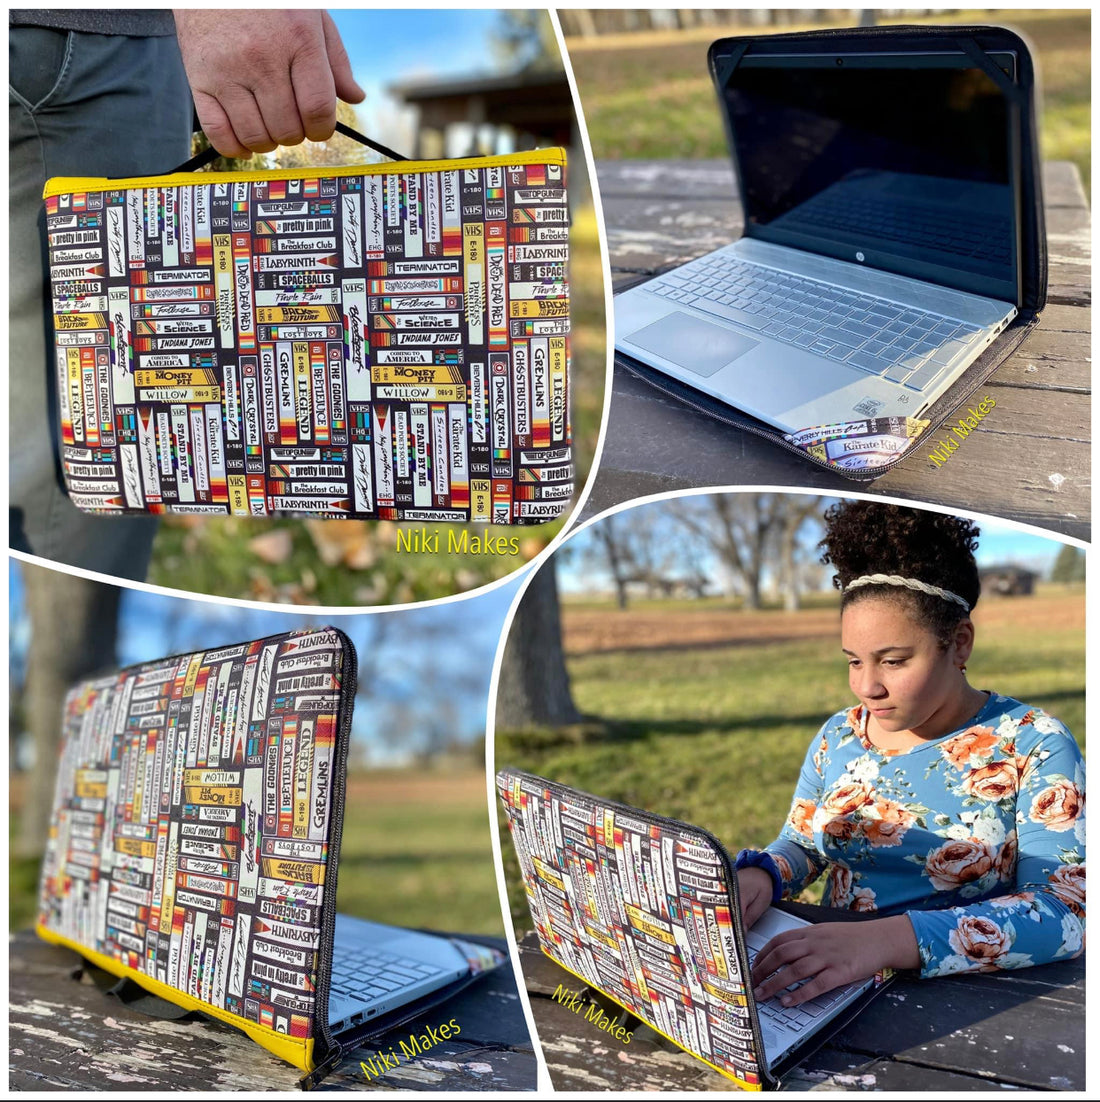 Lv Laptop Skins to Match Your Personal Style